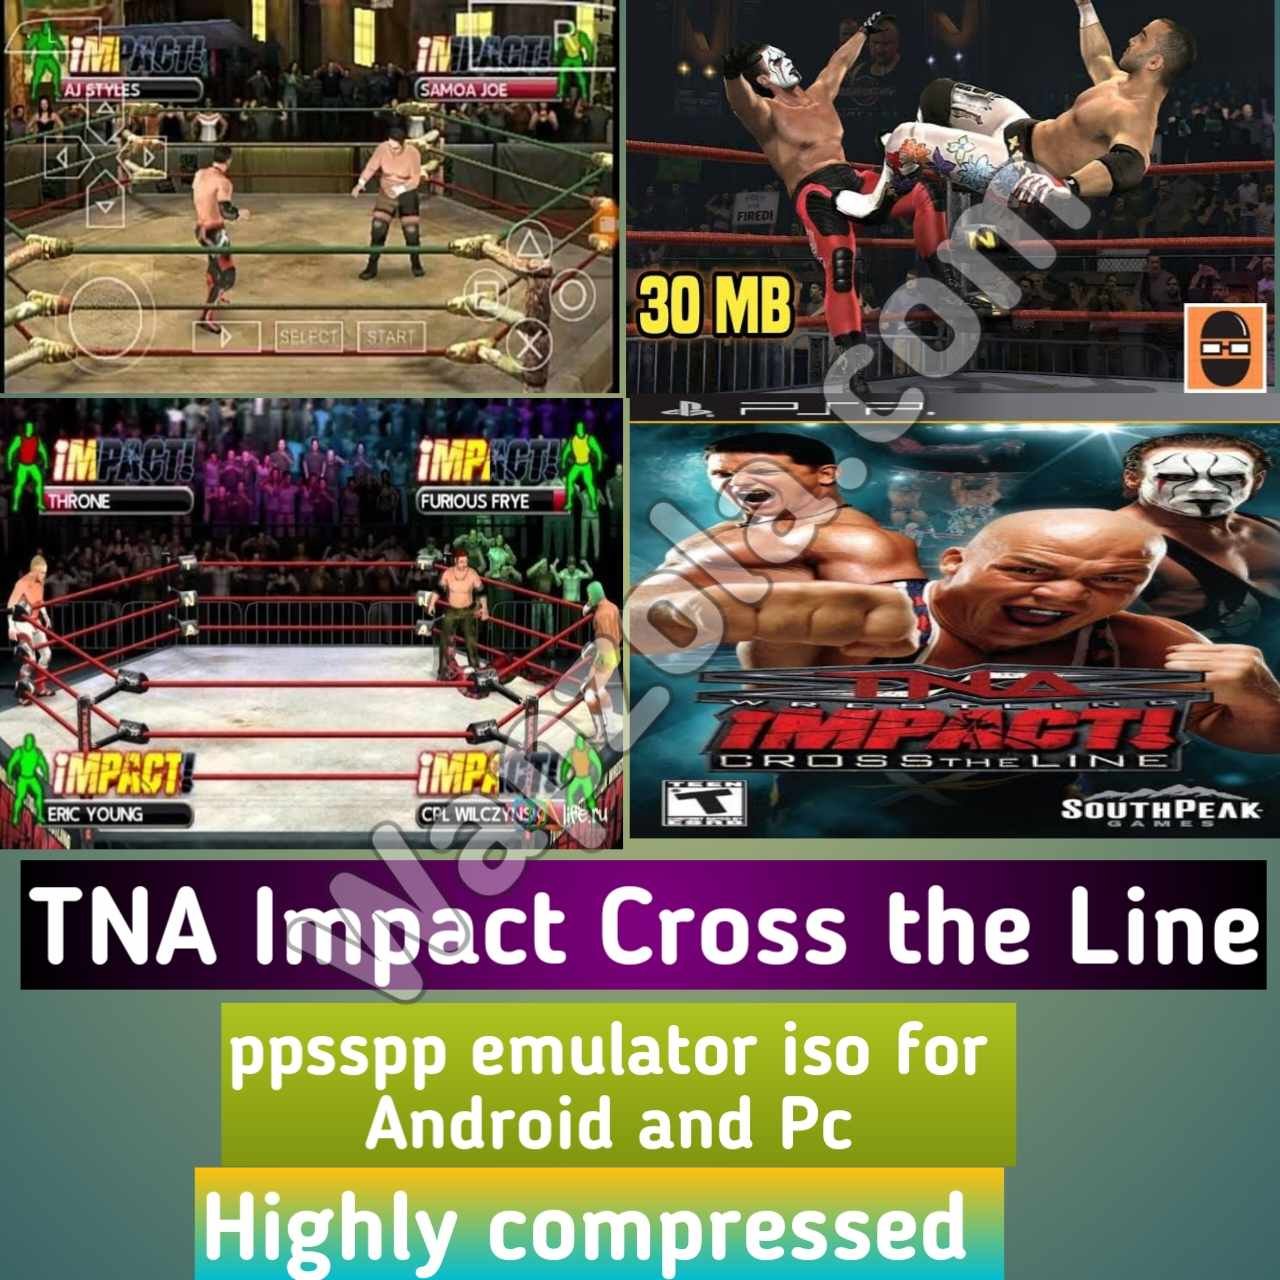 Read more about the article [Download] TNA Impact Wrestling: Cross the Line ppsspp emulator – PSP APK Iso highly compressed 20MB